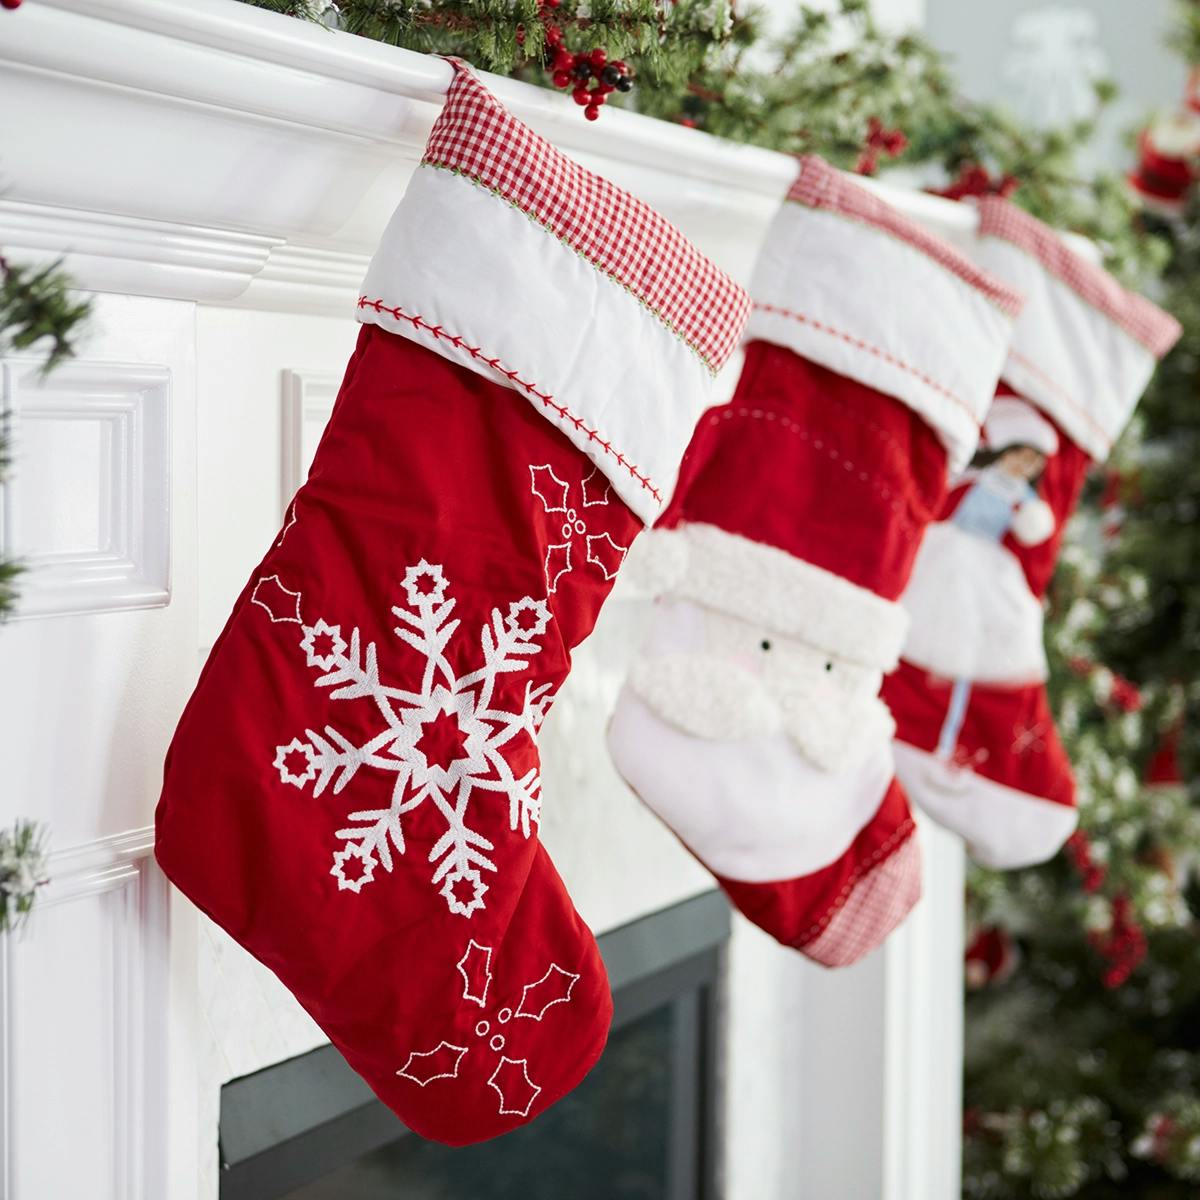 Red and white festive Christmas stockings hanging diagonally on a mantel. From foreground to background: Stocking with snowflake, stocking with Santa and stocking with festive holiday girl.